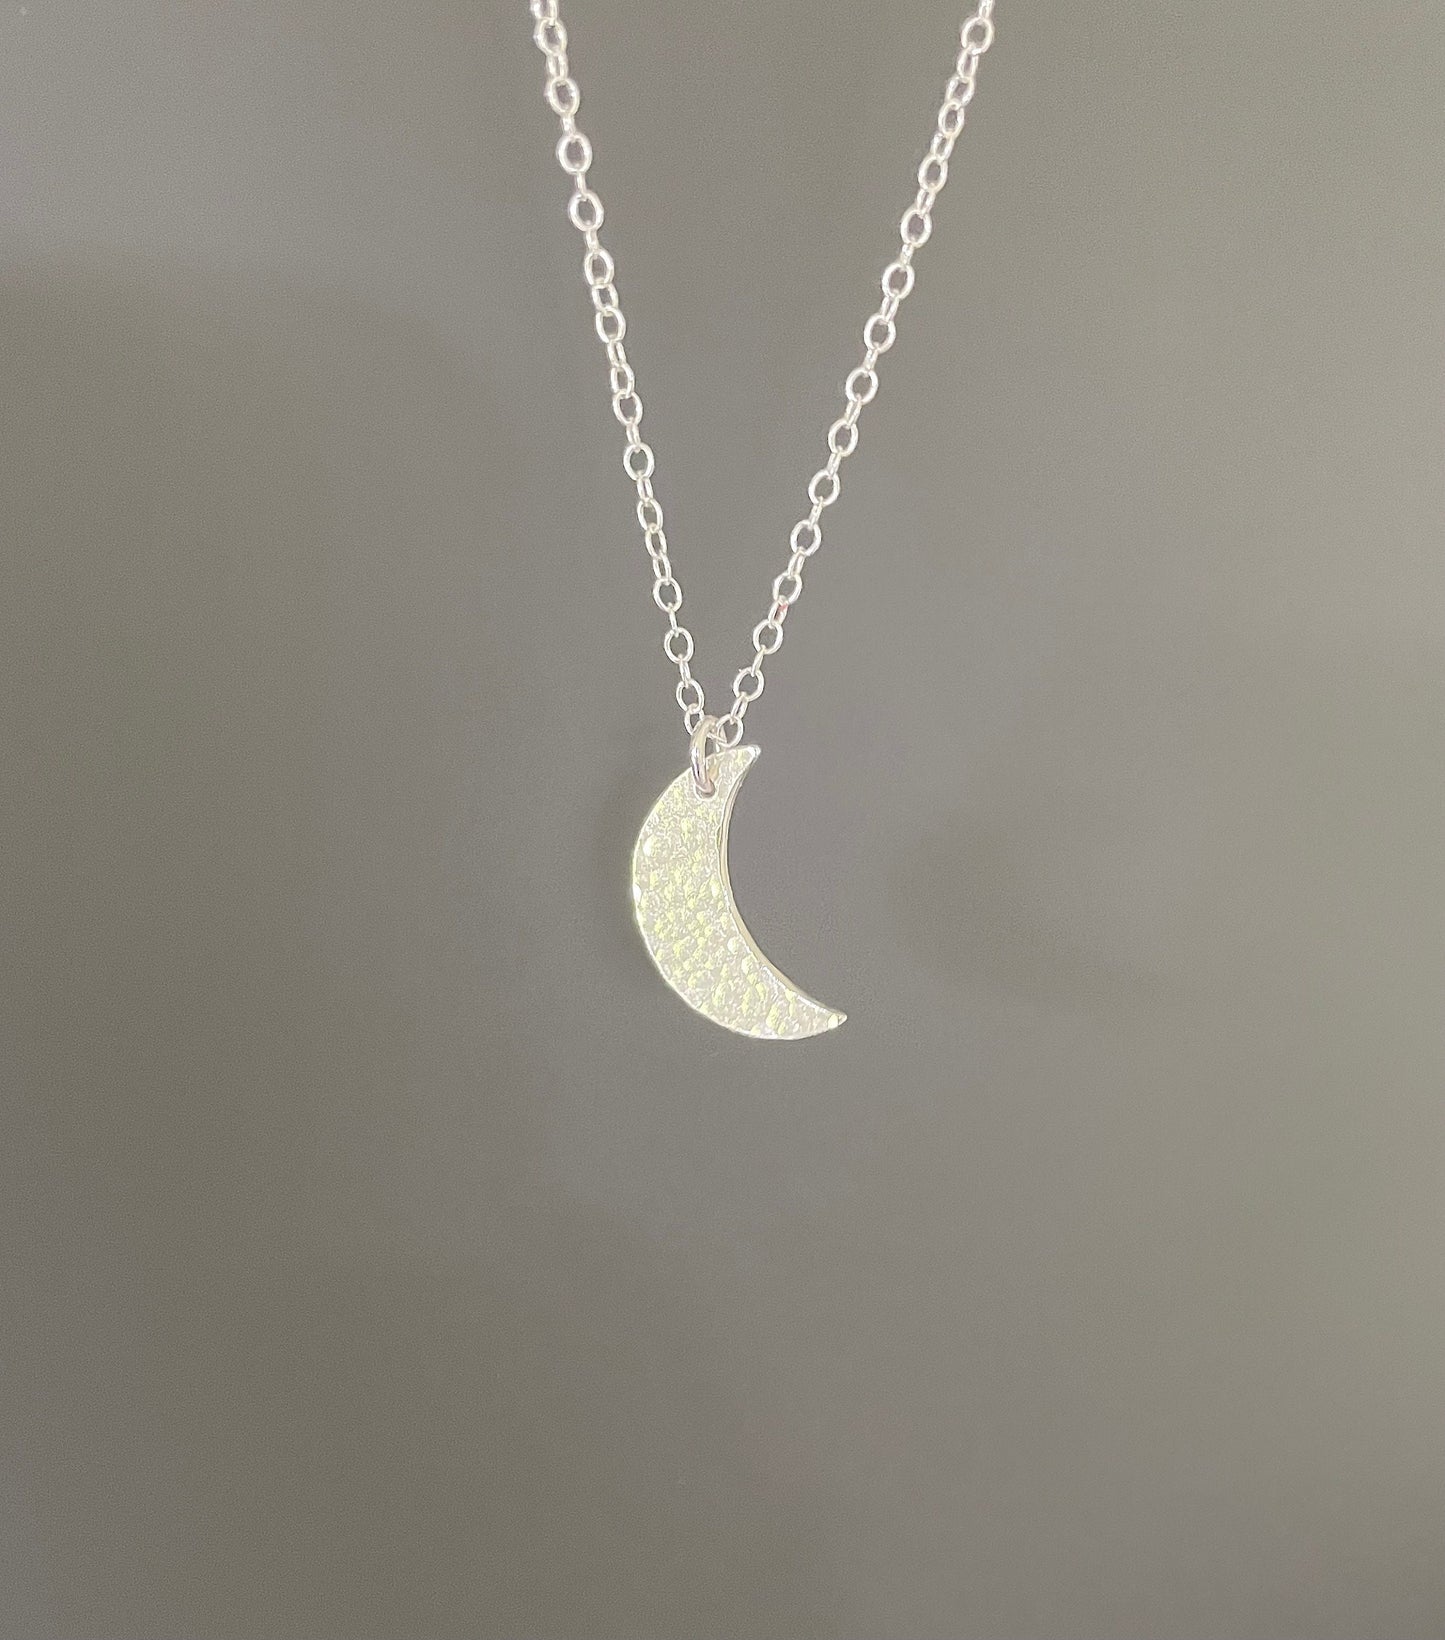 Sterling silver crescent moon necklace